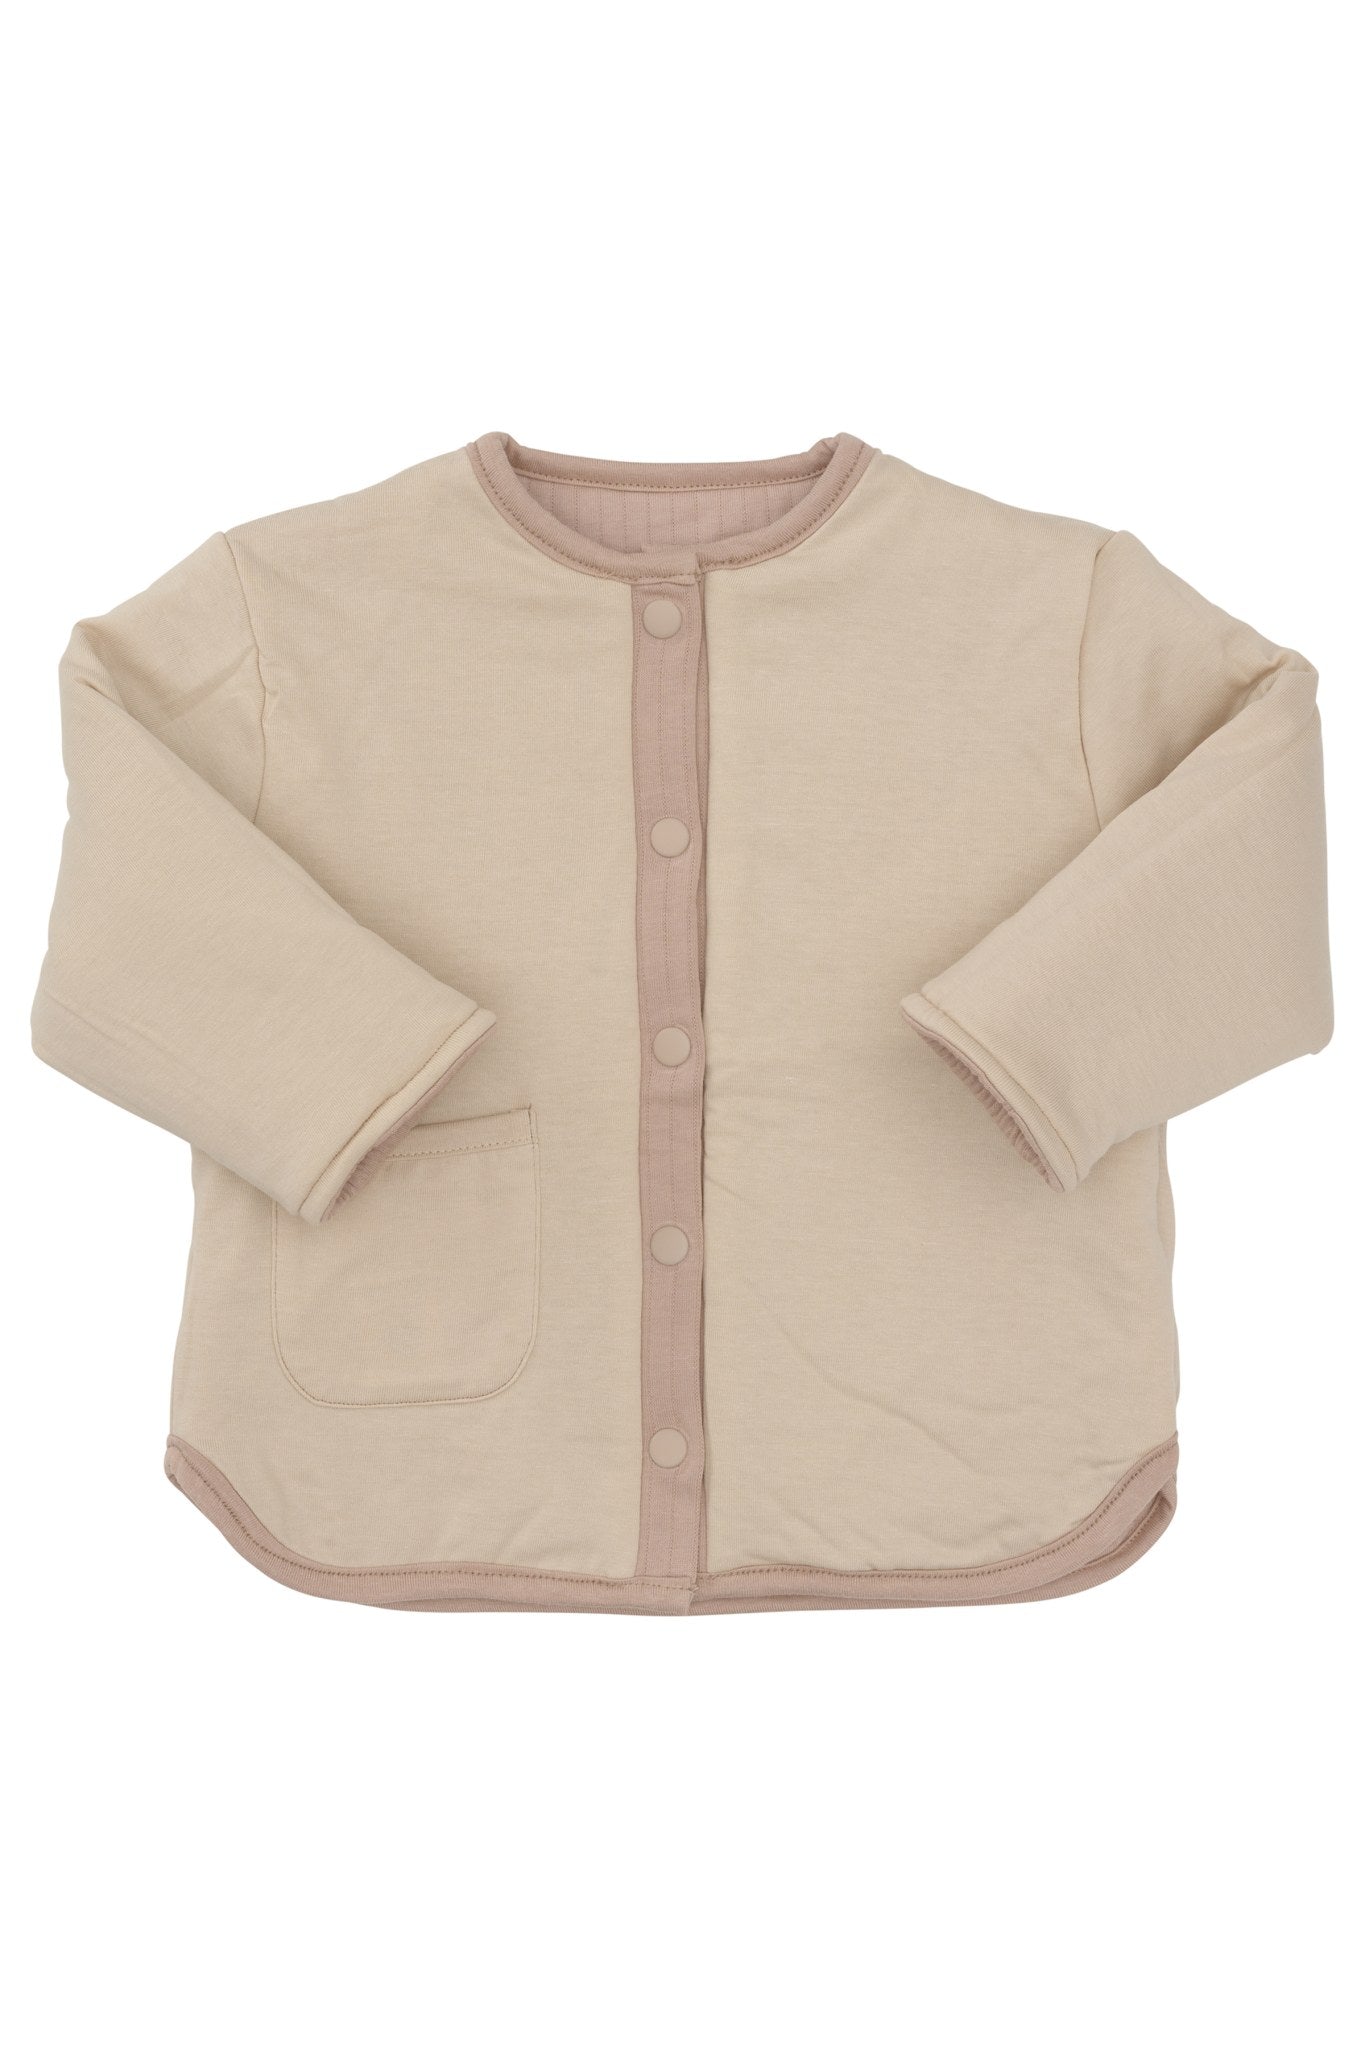 QUILTED REVERSIBLE JACKET - LT TAUPE CREAM COMB